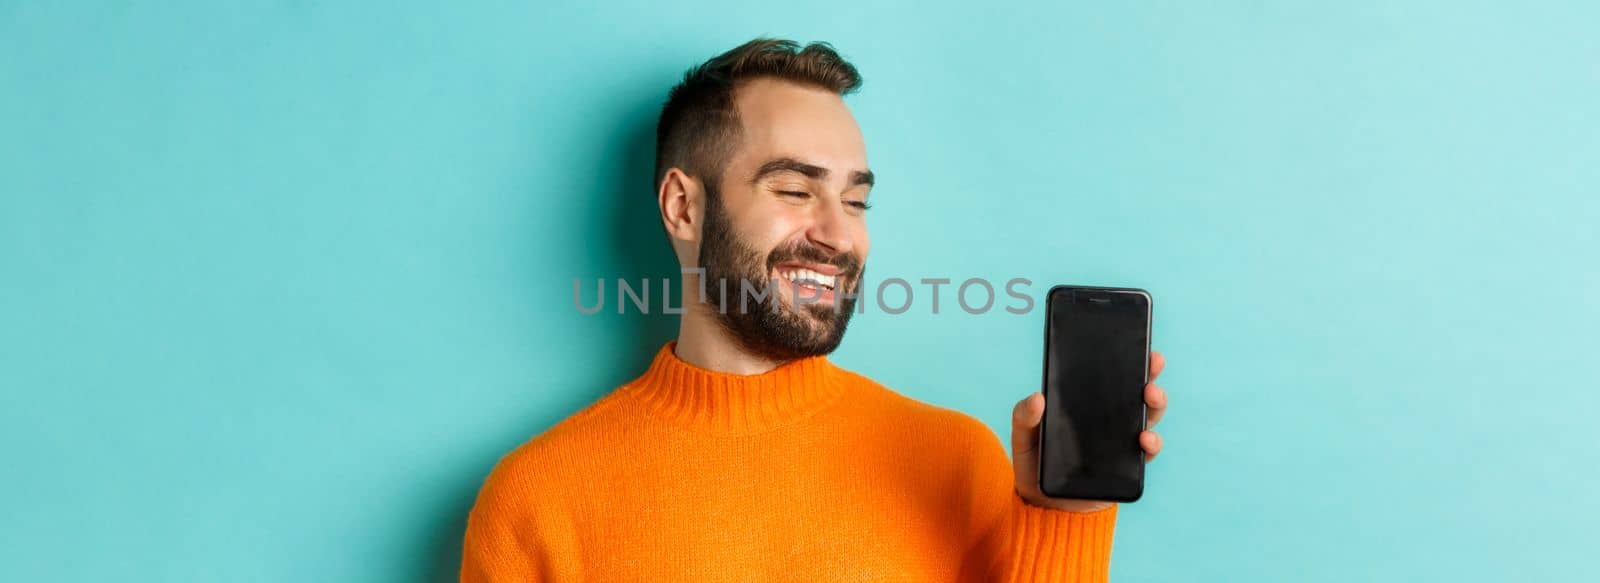 Close-up of young bearded man showing phone screen and looking satisfied, wearing orange sweater, standing against studio background.